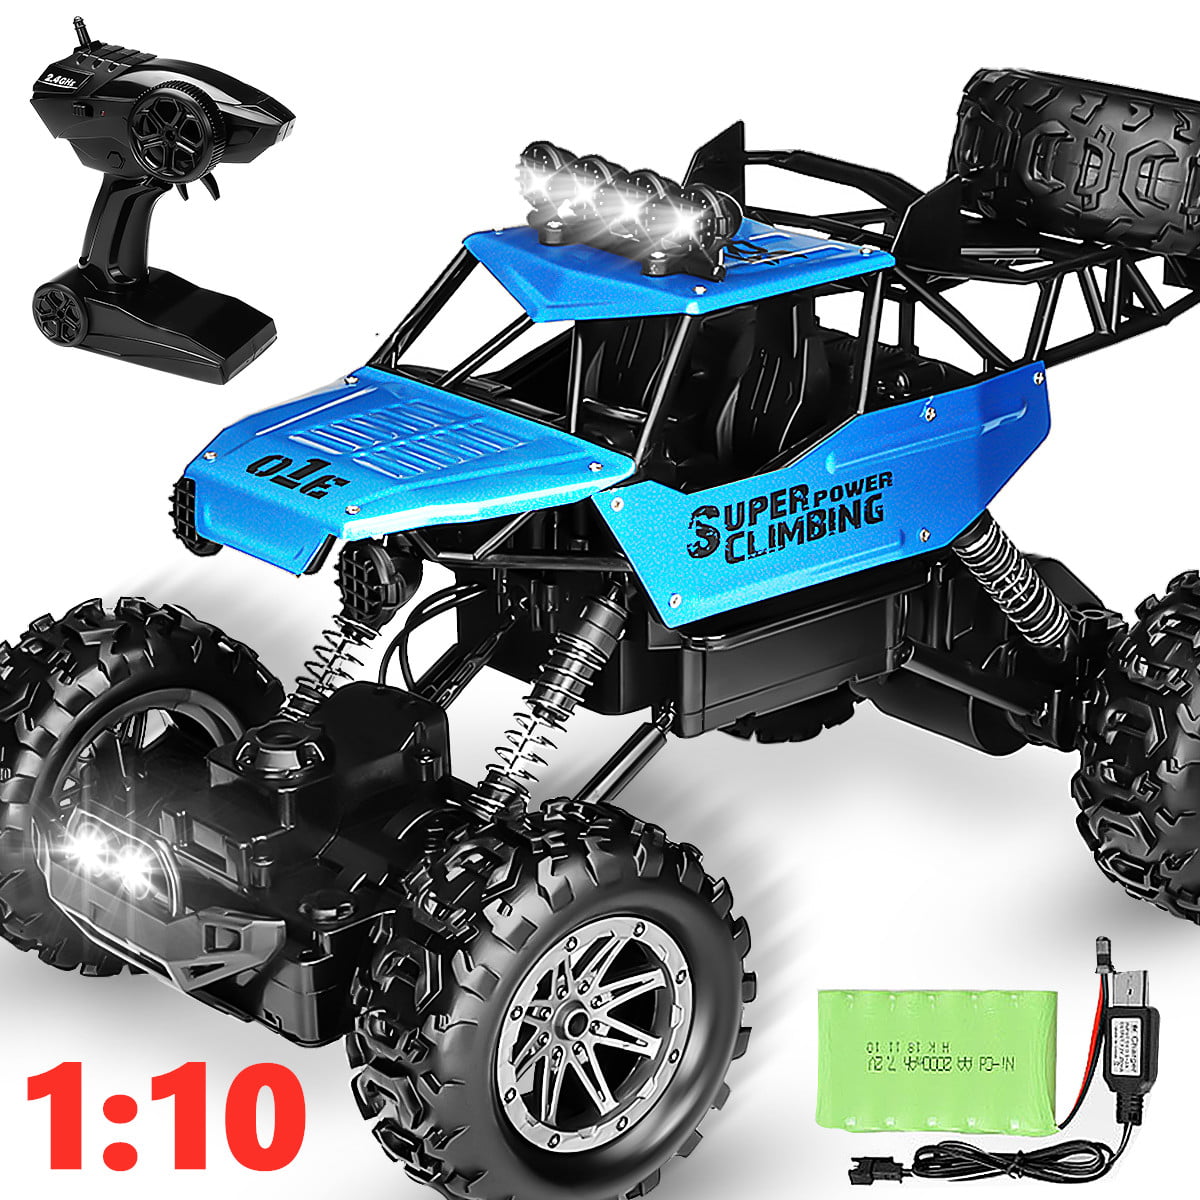 1:10 RC Rock Crawler Truck 4WD Rally Car 2.4GHz Remote Control RTR Blue New 